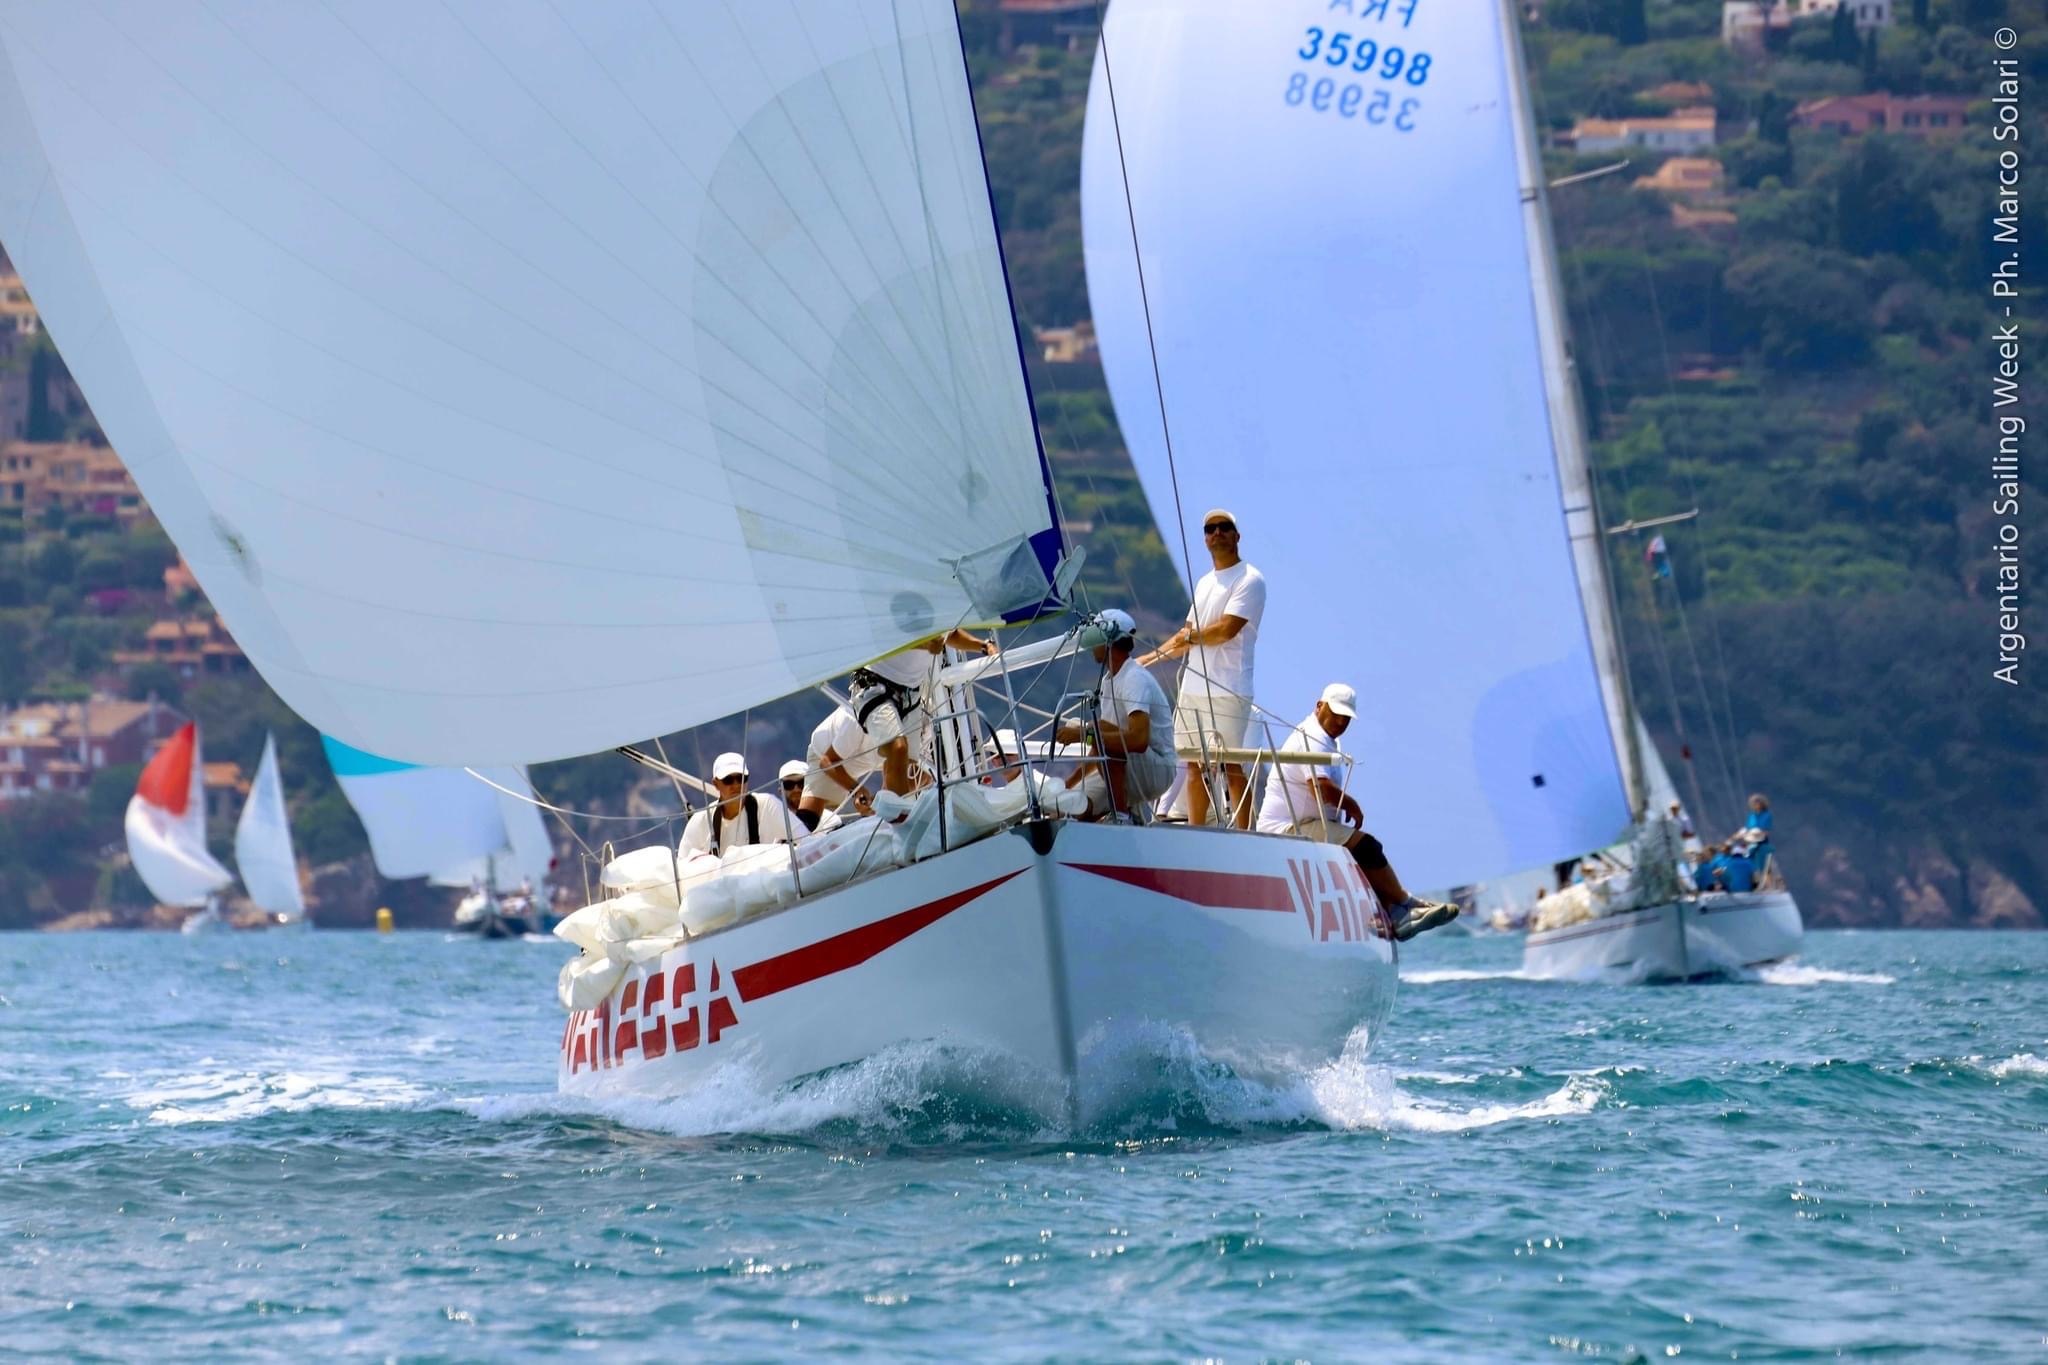 Argentario Sailing Week, che spettacolo